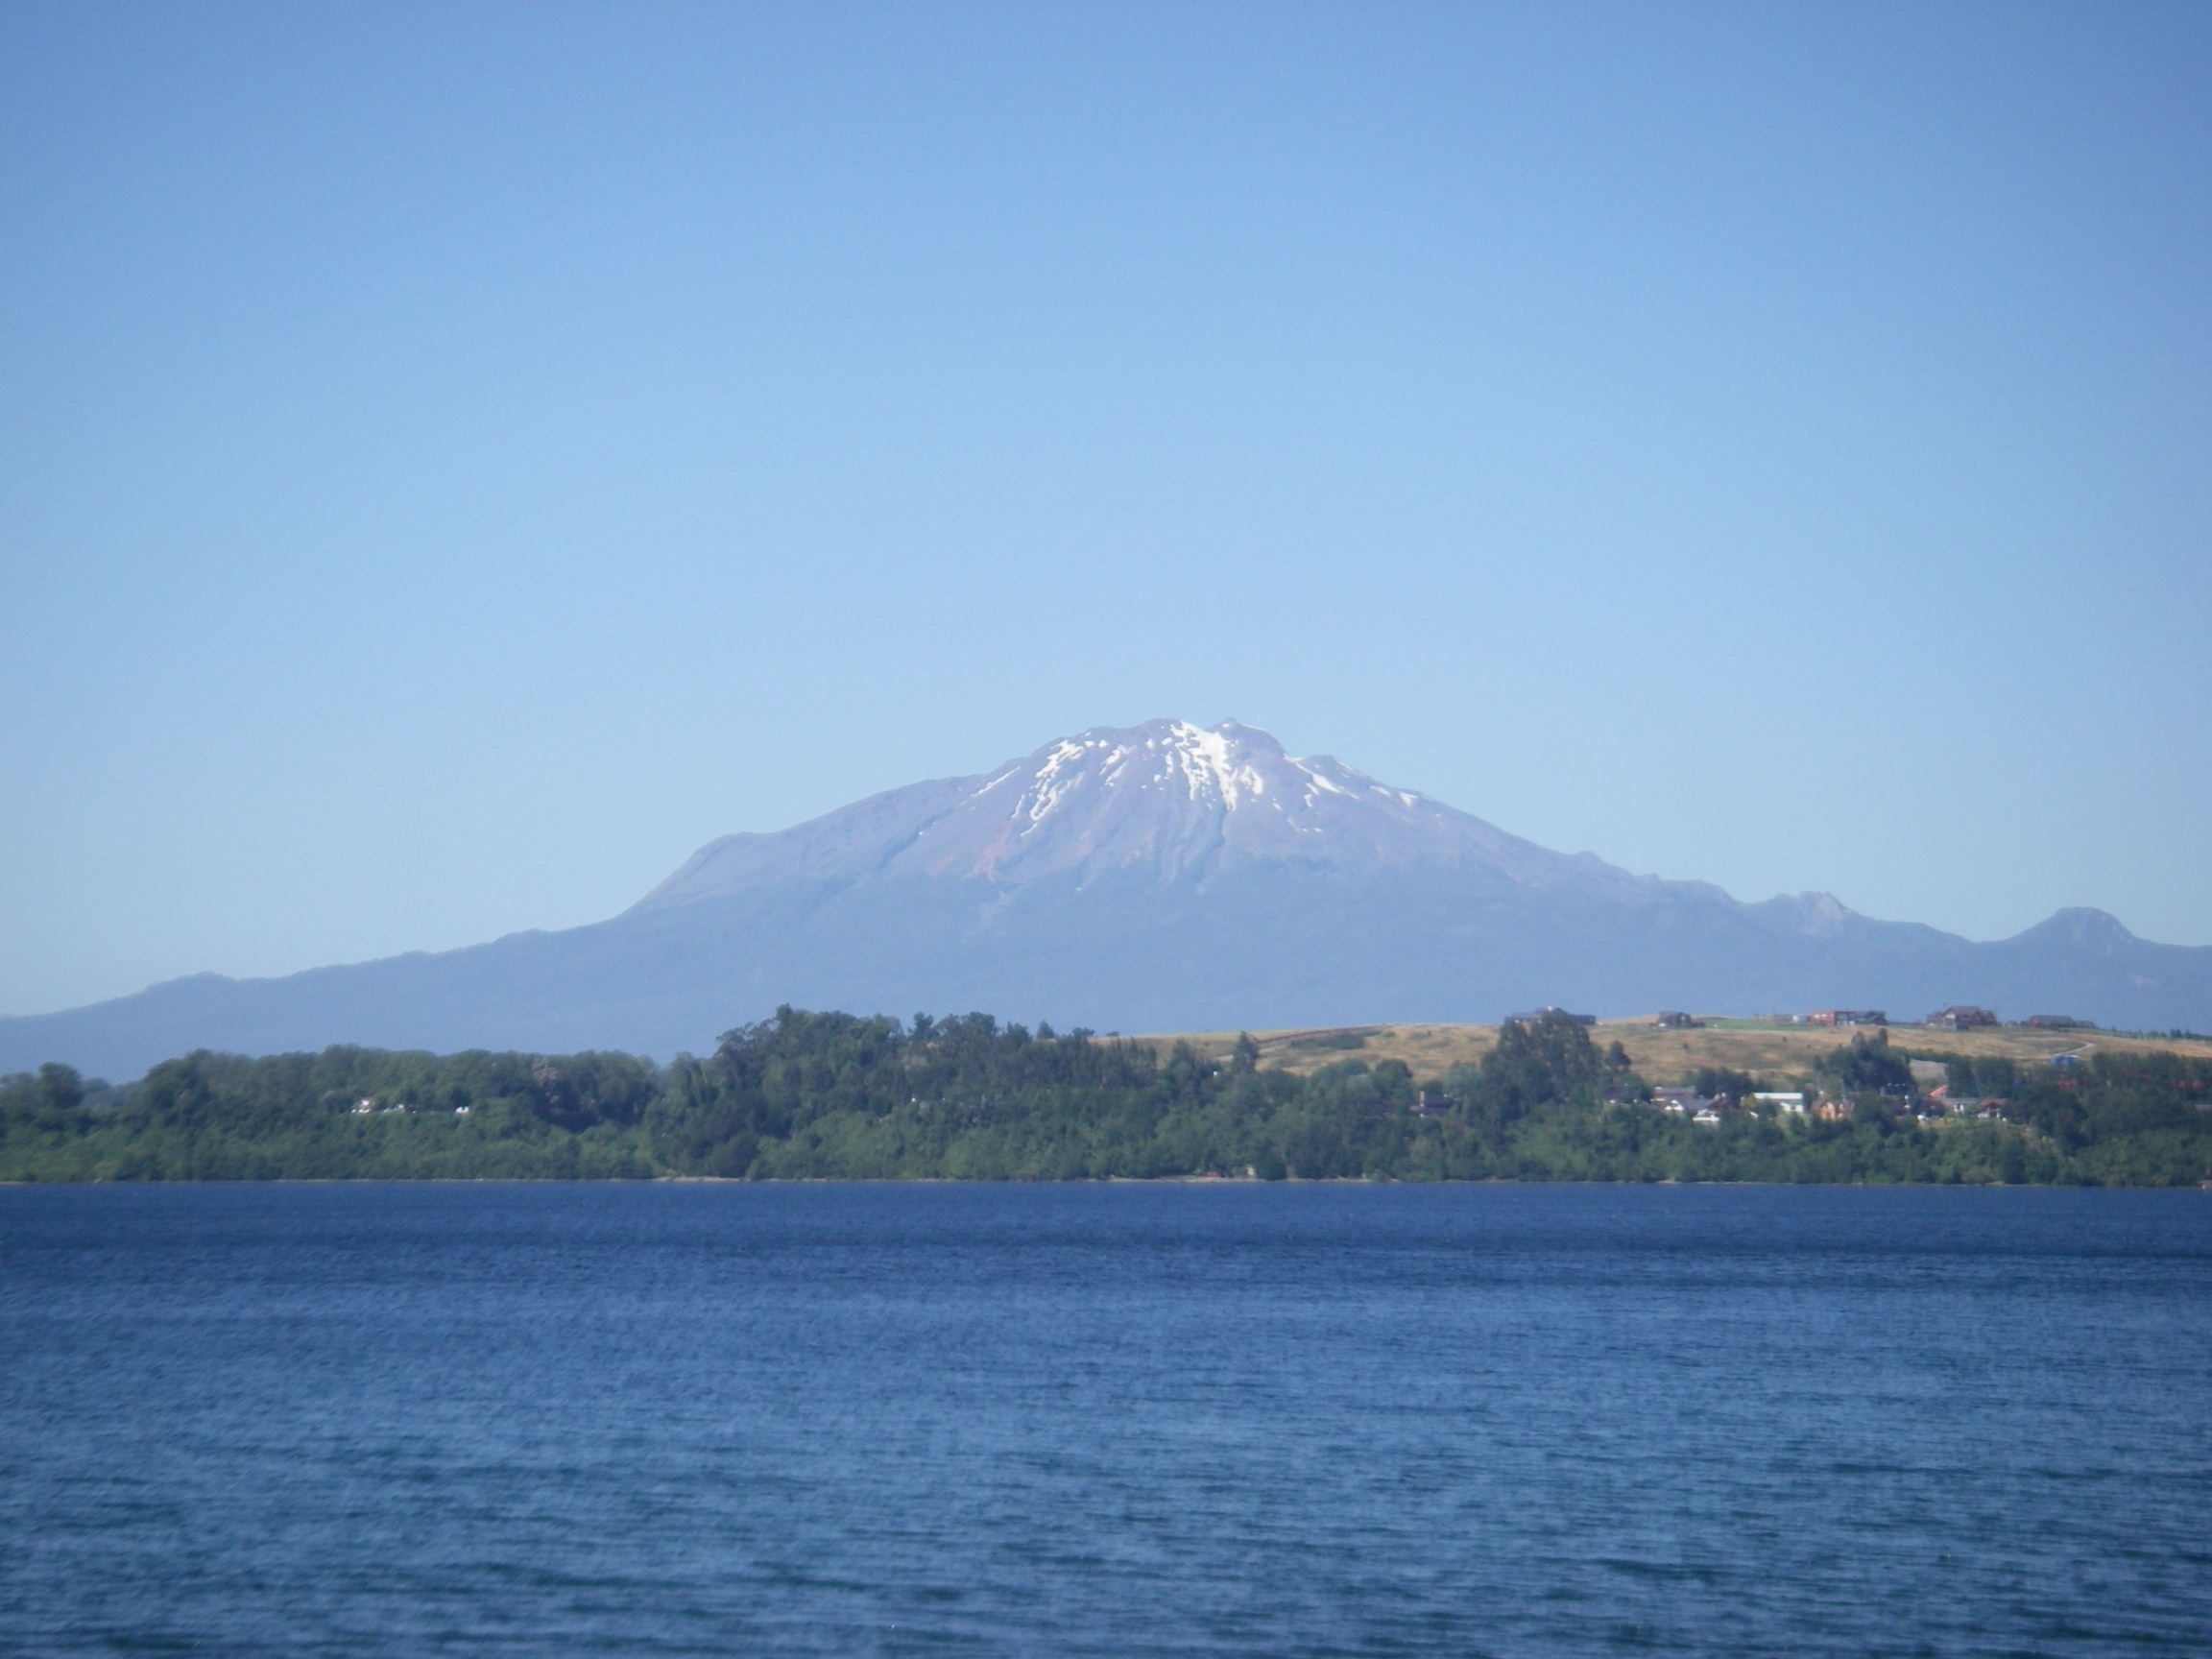 Lake and mountain views from Puerto Varas